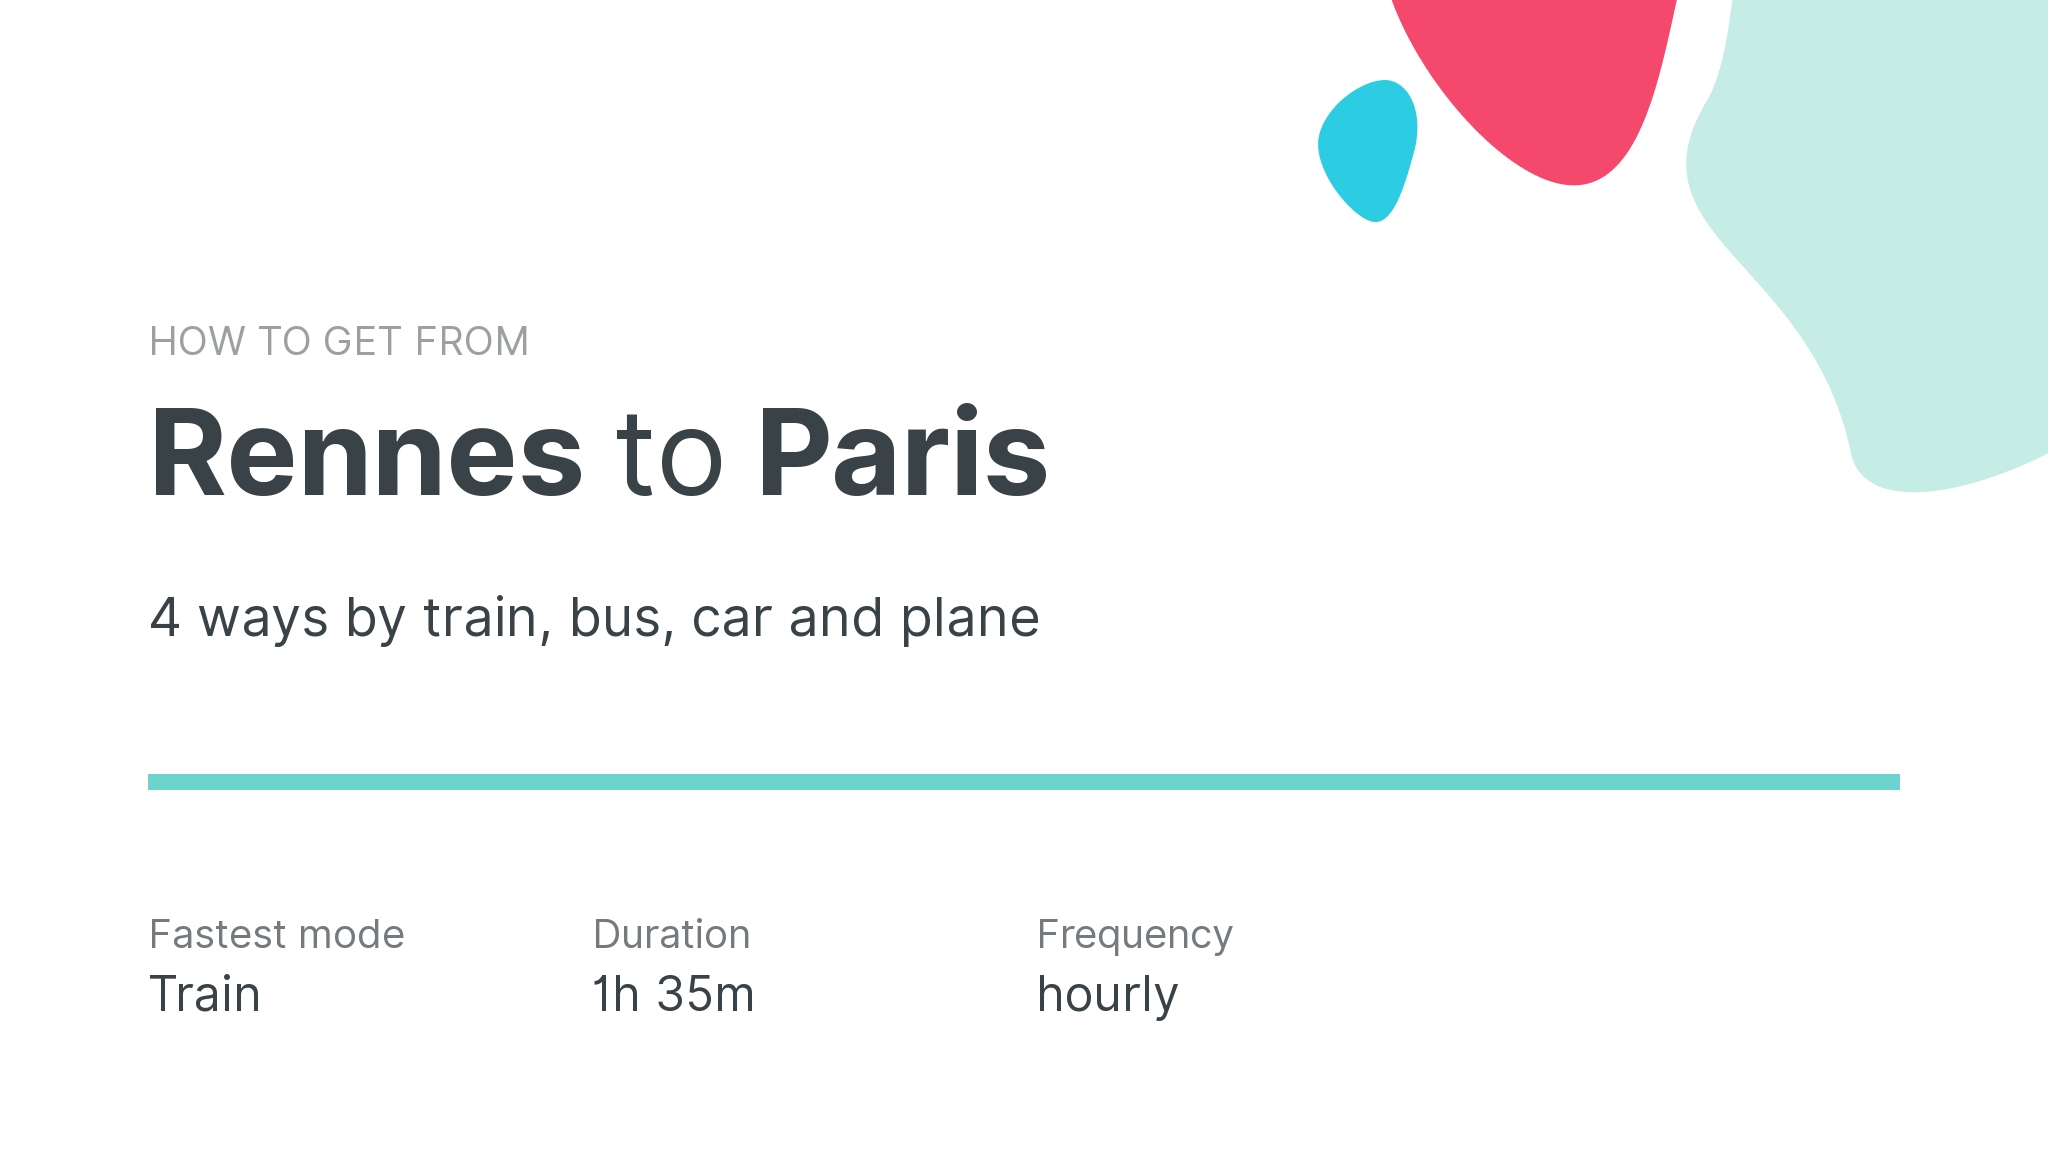 How do I get from Rennes to Paris